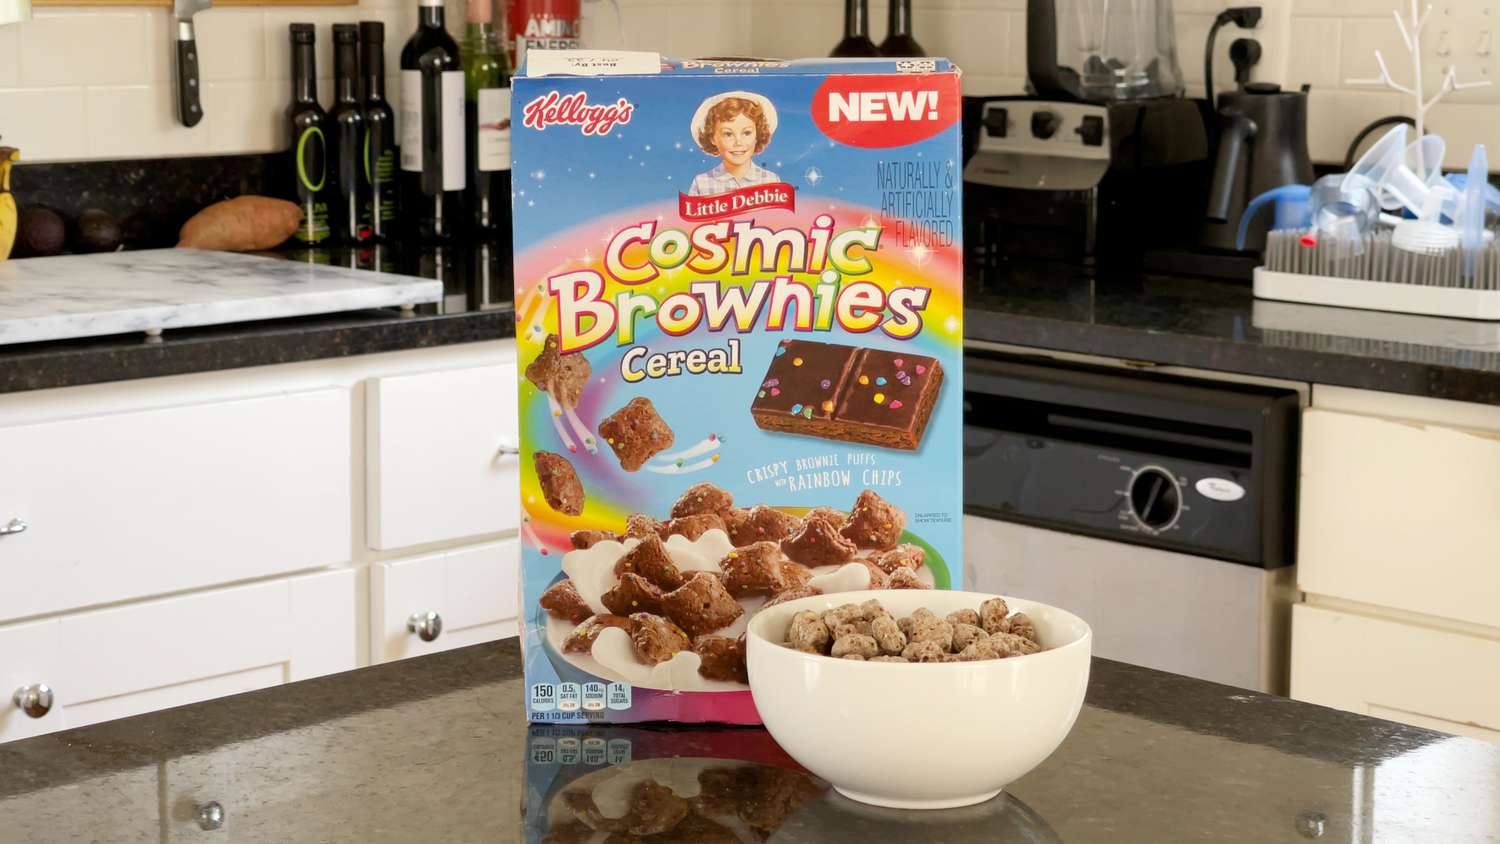 Box of Kellog's Little Debbie Cosmic Brownies Cereal on a counter with a bowl filled with the cereal in the foreground